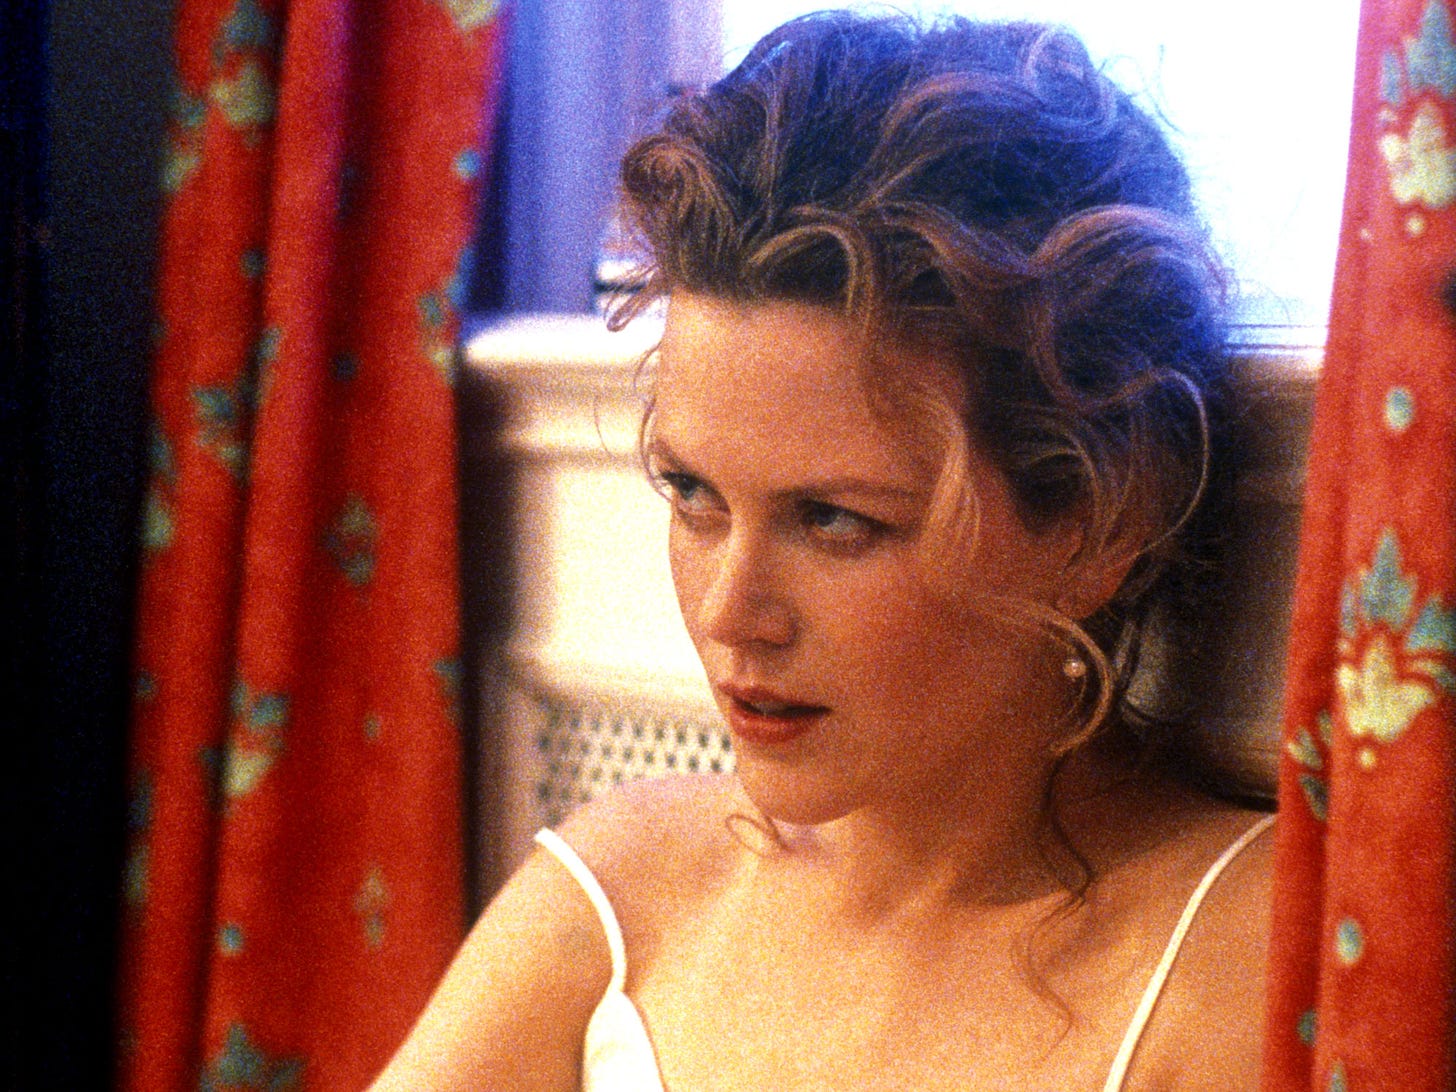 Eyes Wide Shut is returning to cinemas for its 20th anniversary